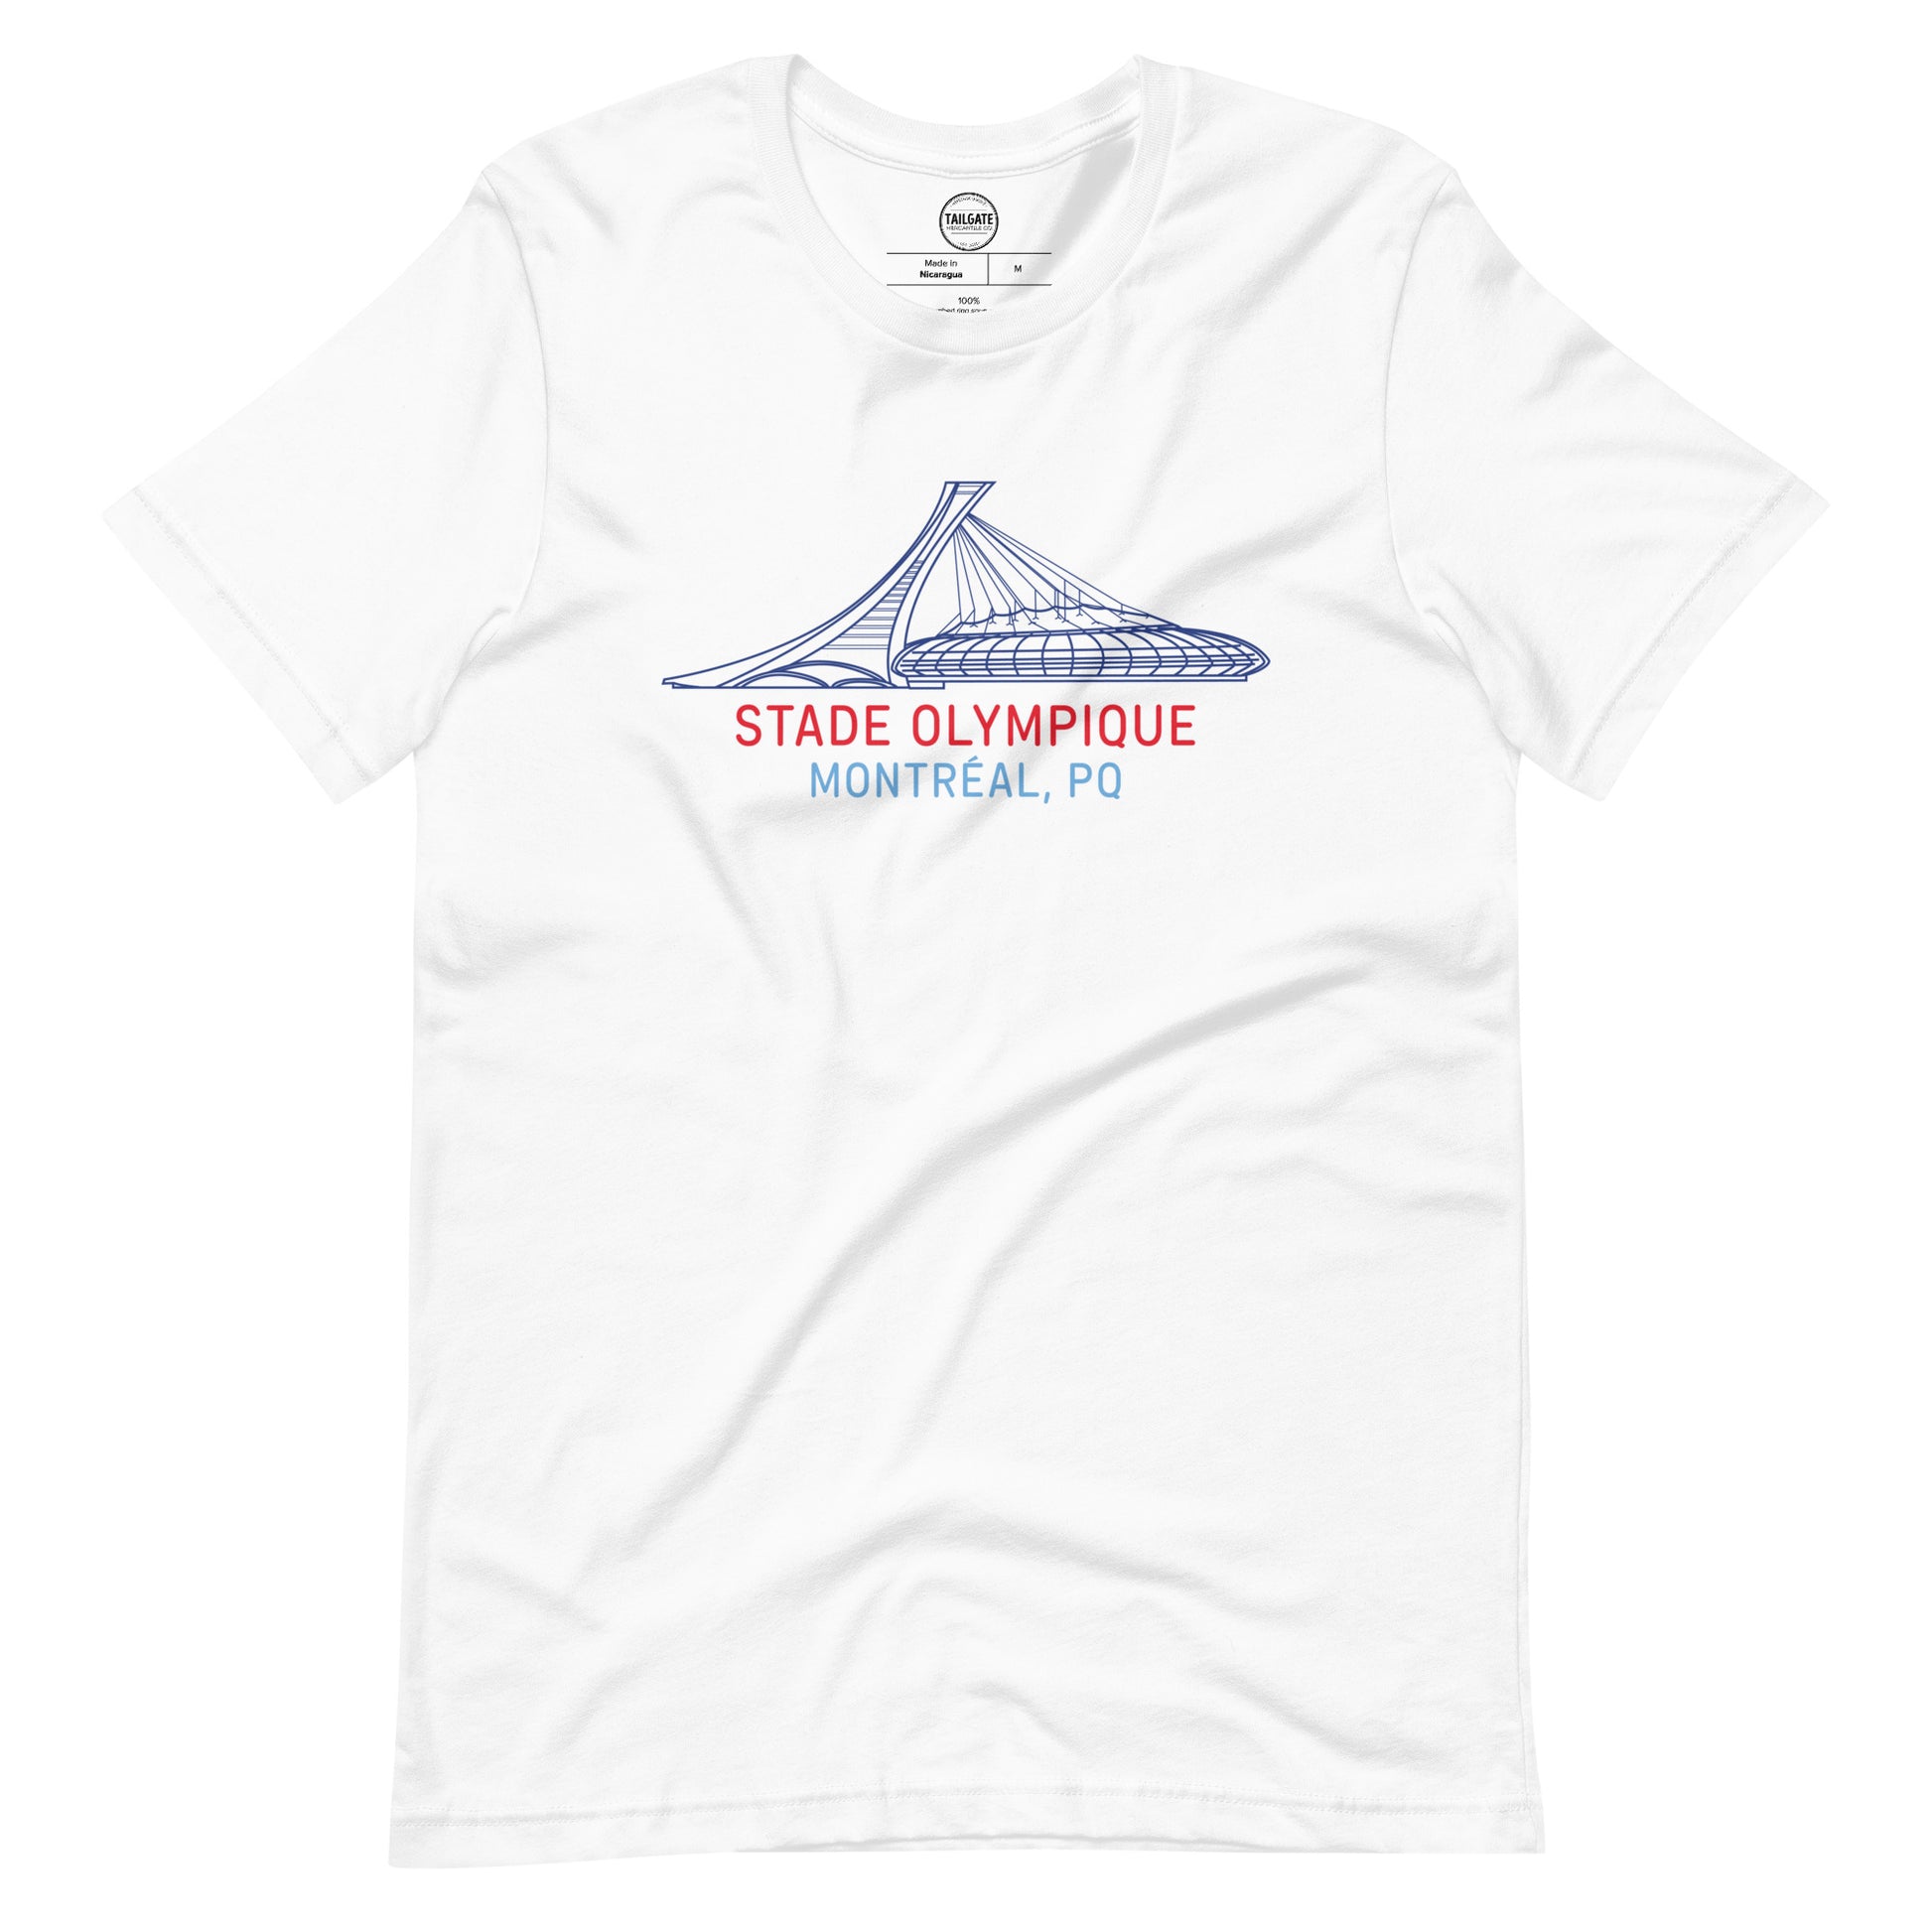 Image of white t-shirt with design of "Stade Olympique, Montreal, PQ" illustrated ballpark completed in retro Montreal Expos colours located on centre chest. This design is exclusive to Tailgate Mercantile and available only online.